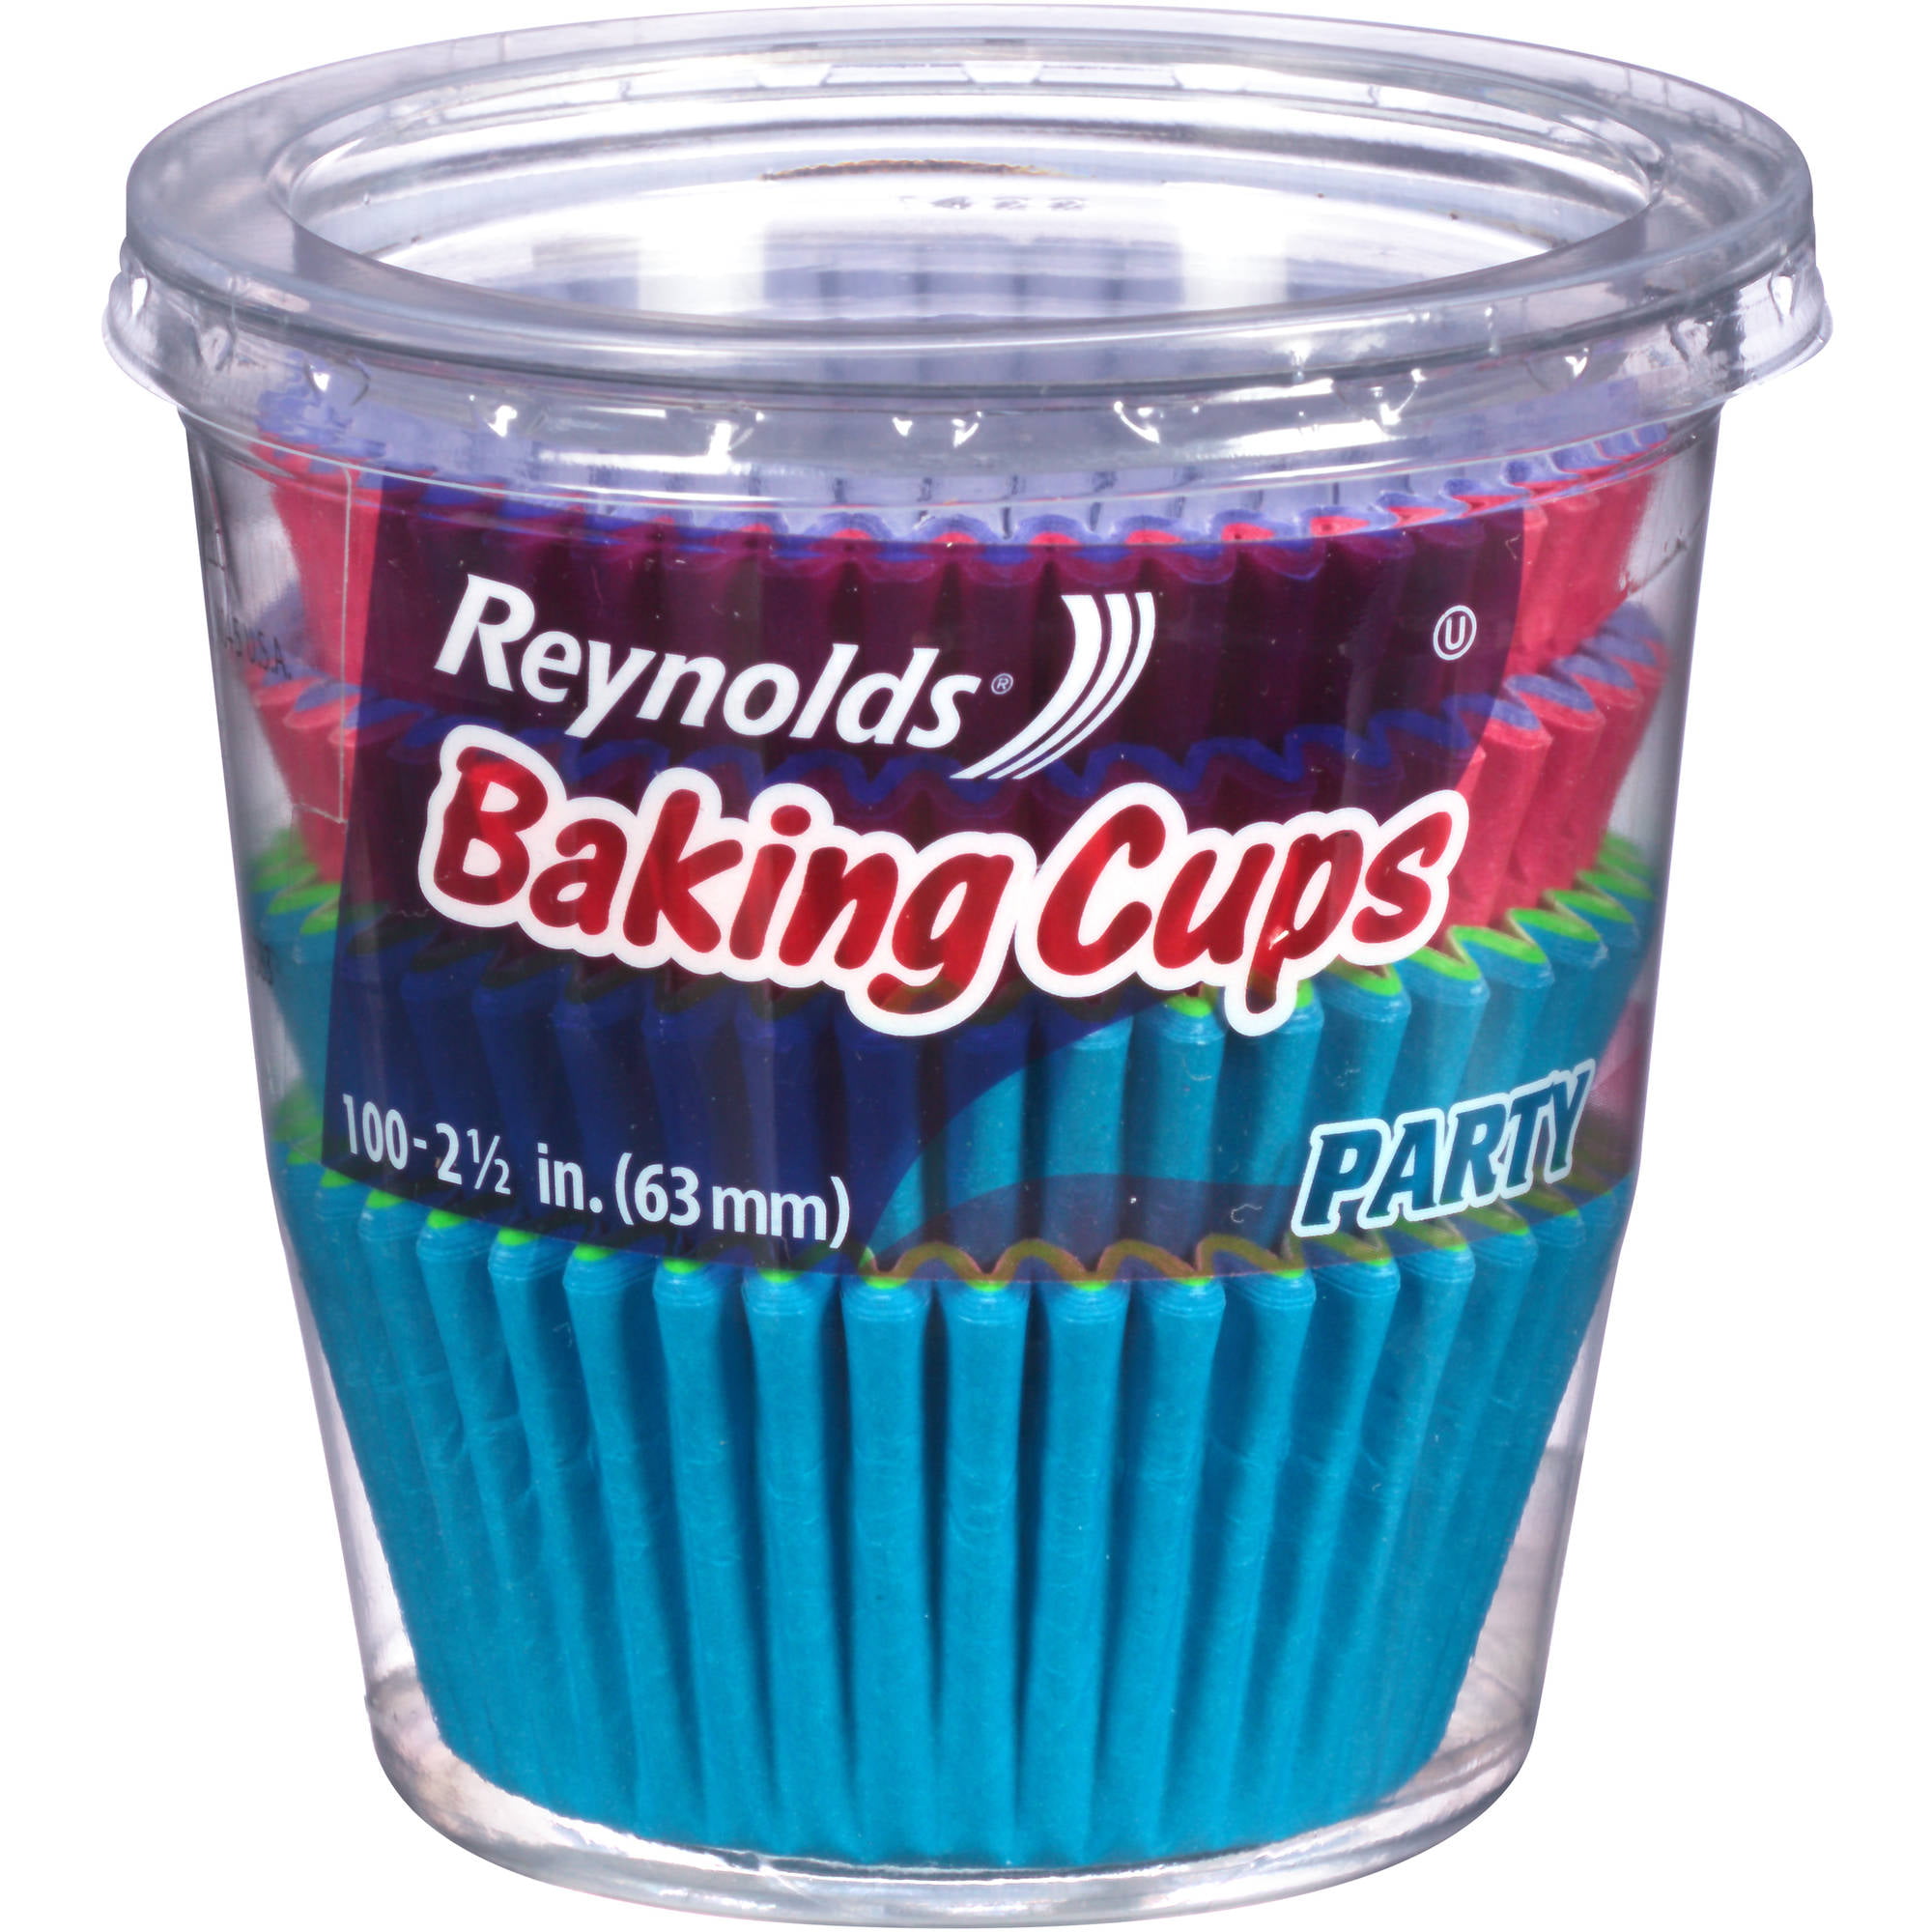 Our Point of View on Reynolds Baking Cups 